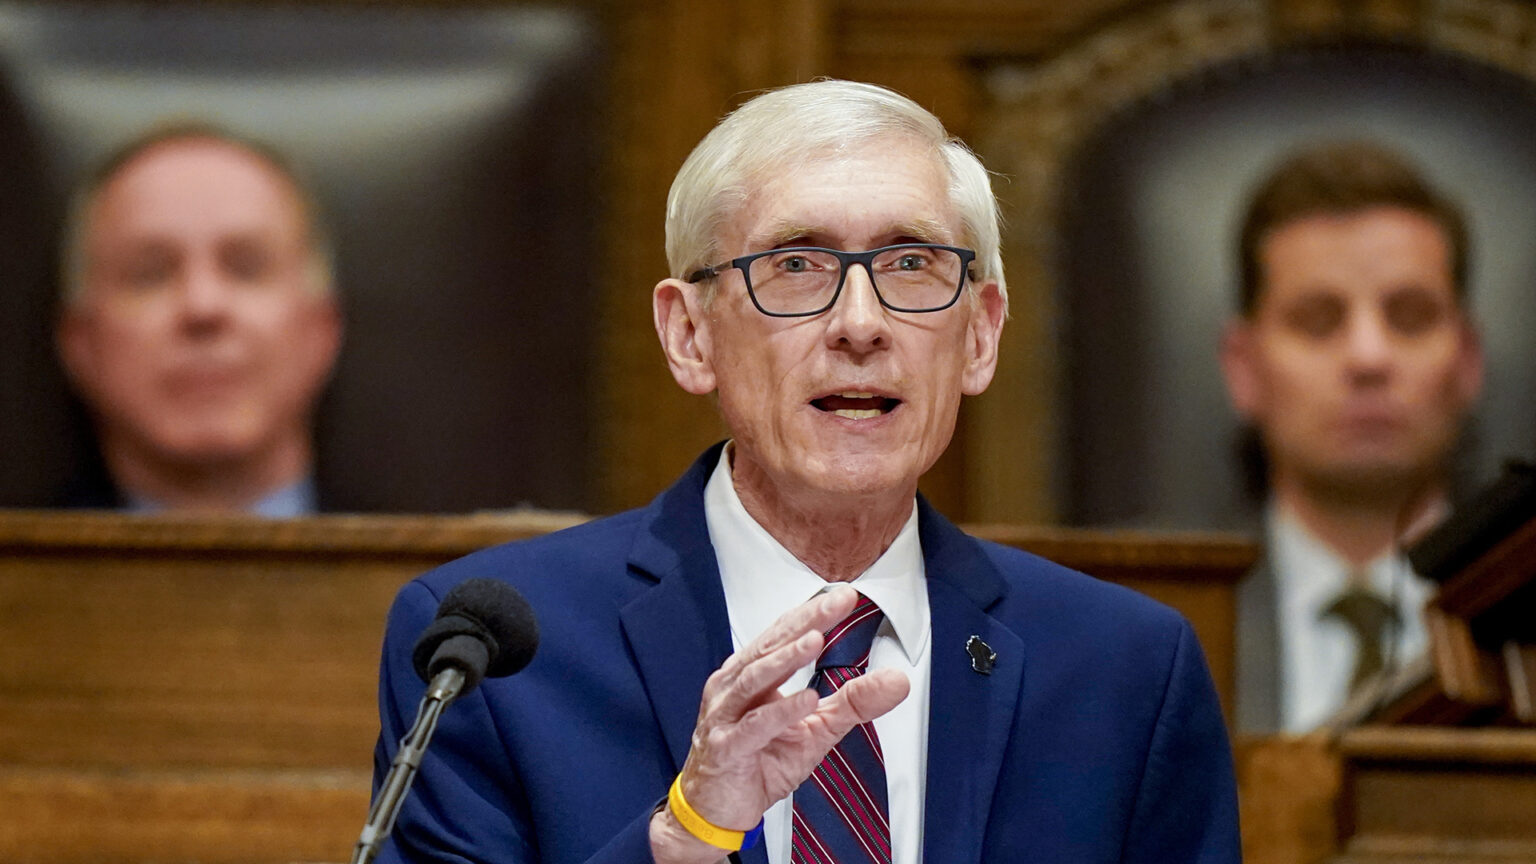 Tony Evers stands at a dais in the Wisconsin Assembly chambers and speaks into a microphone while gesturing with his right hand, with two legislative leadership members seated in the background.